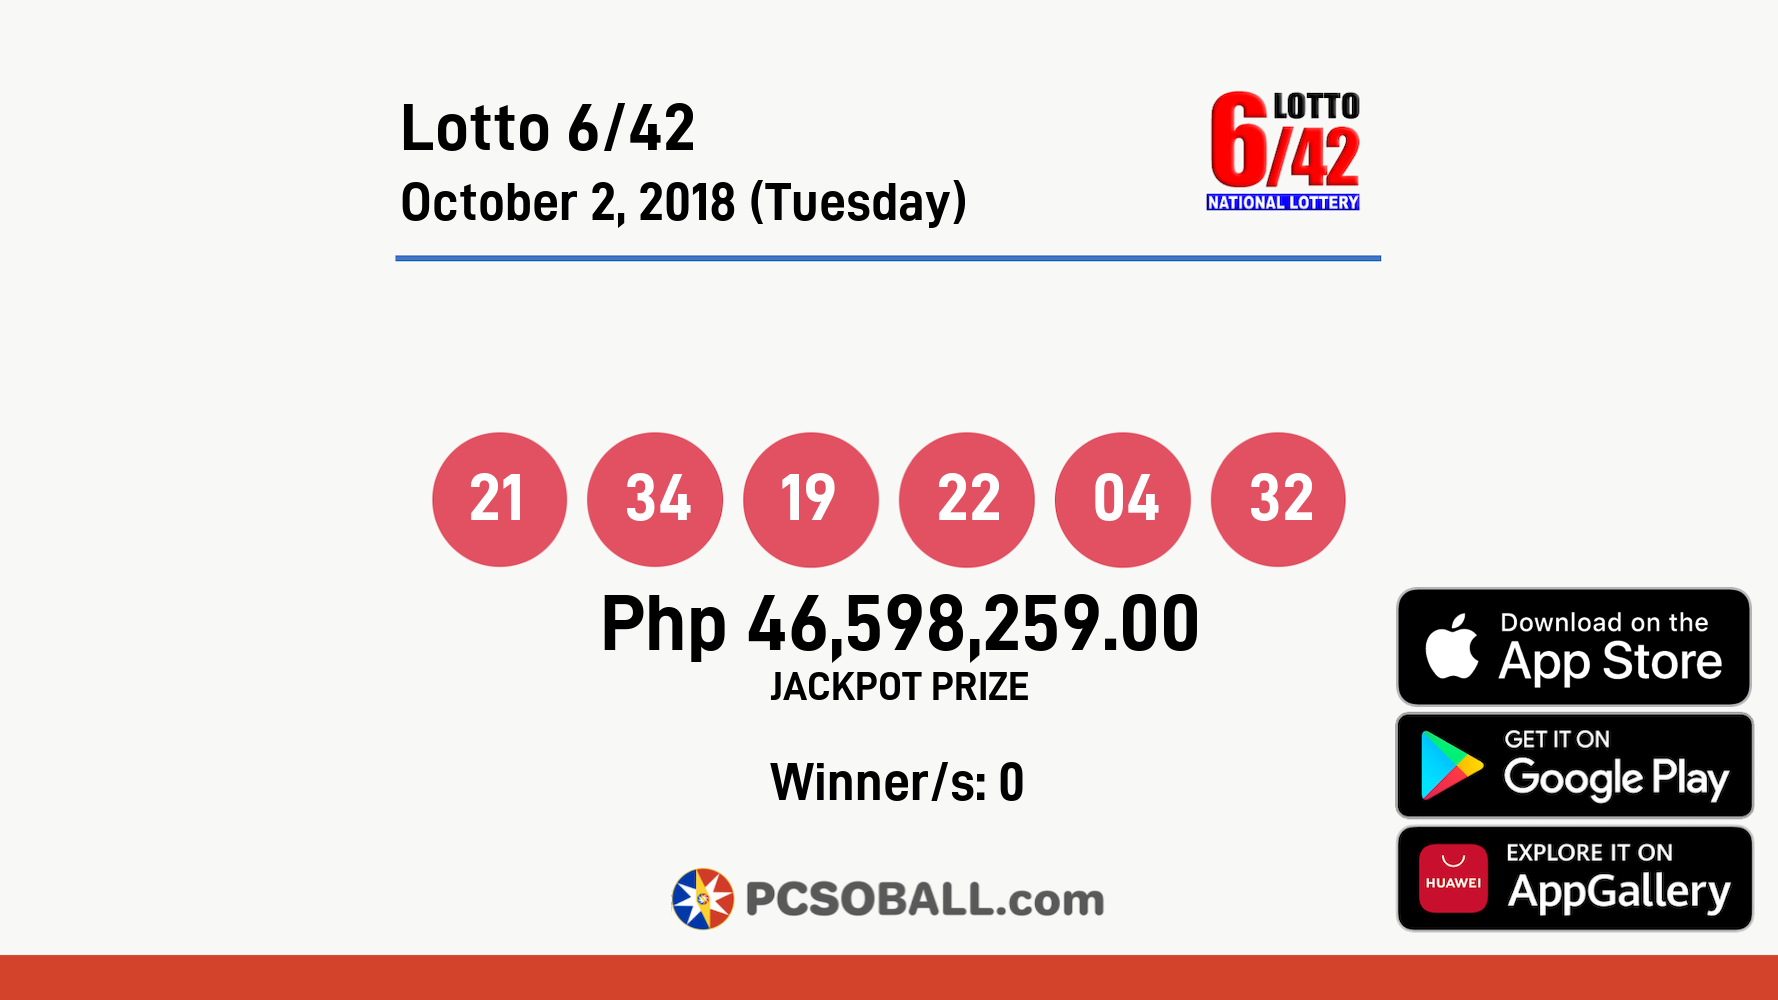 Lotto 6/42 October 2, 2018 (Tuesday) Result